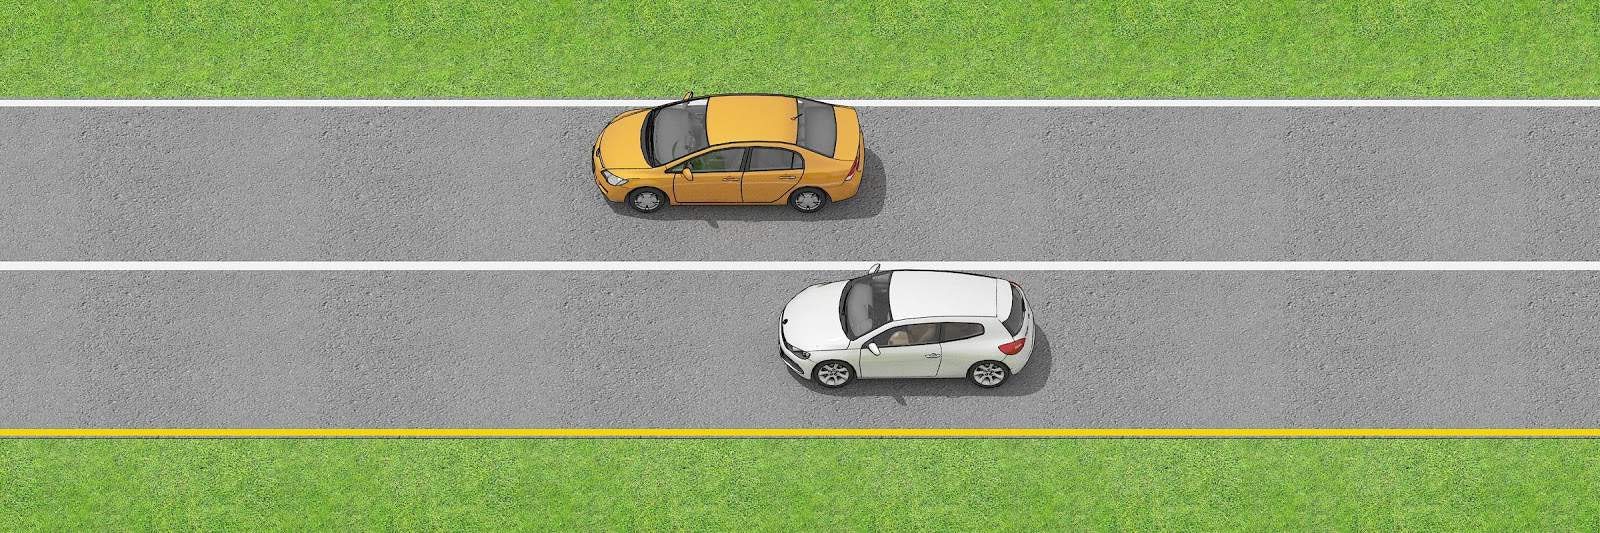 Two vehicles traveling in the same directions separated by a single solid white line